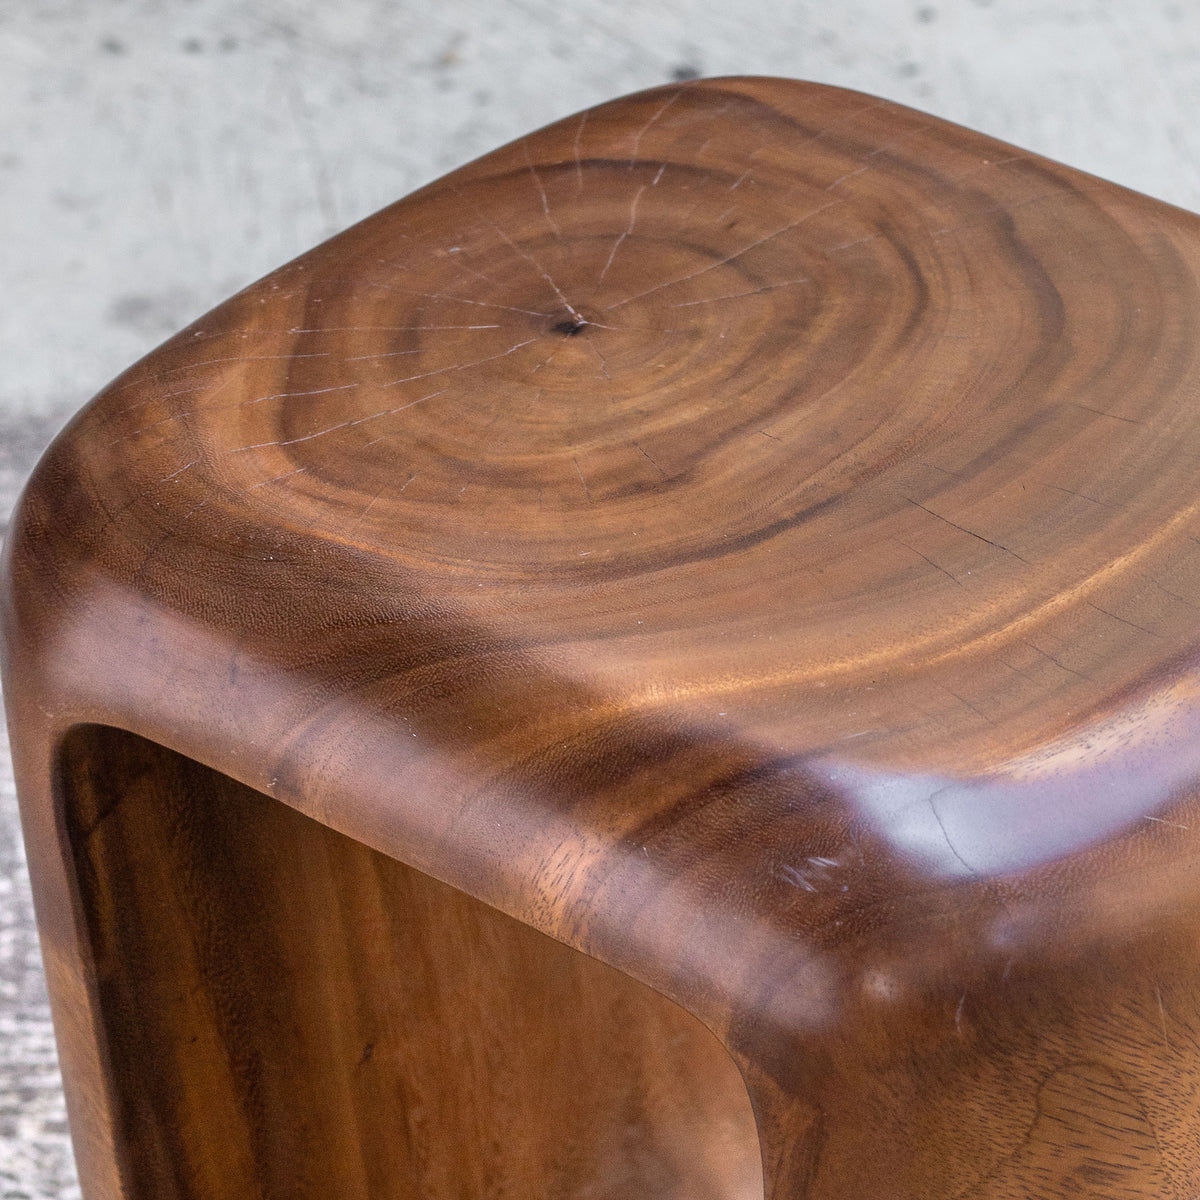 Loophole Wooden Accent Stool